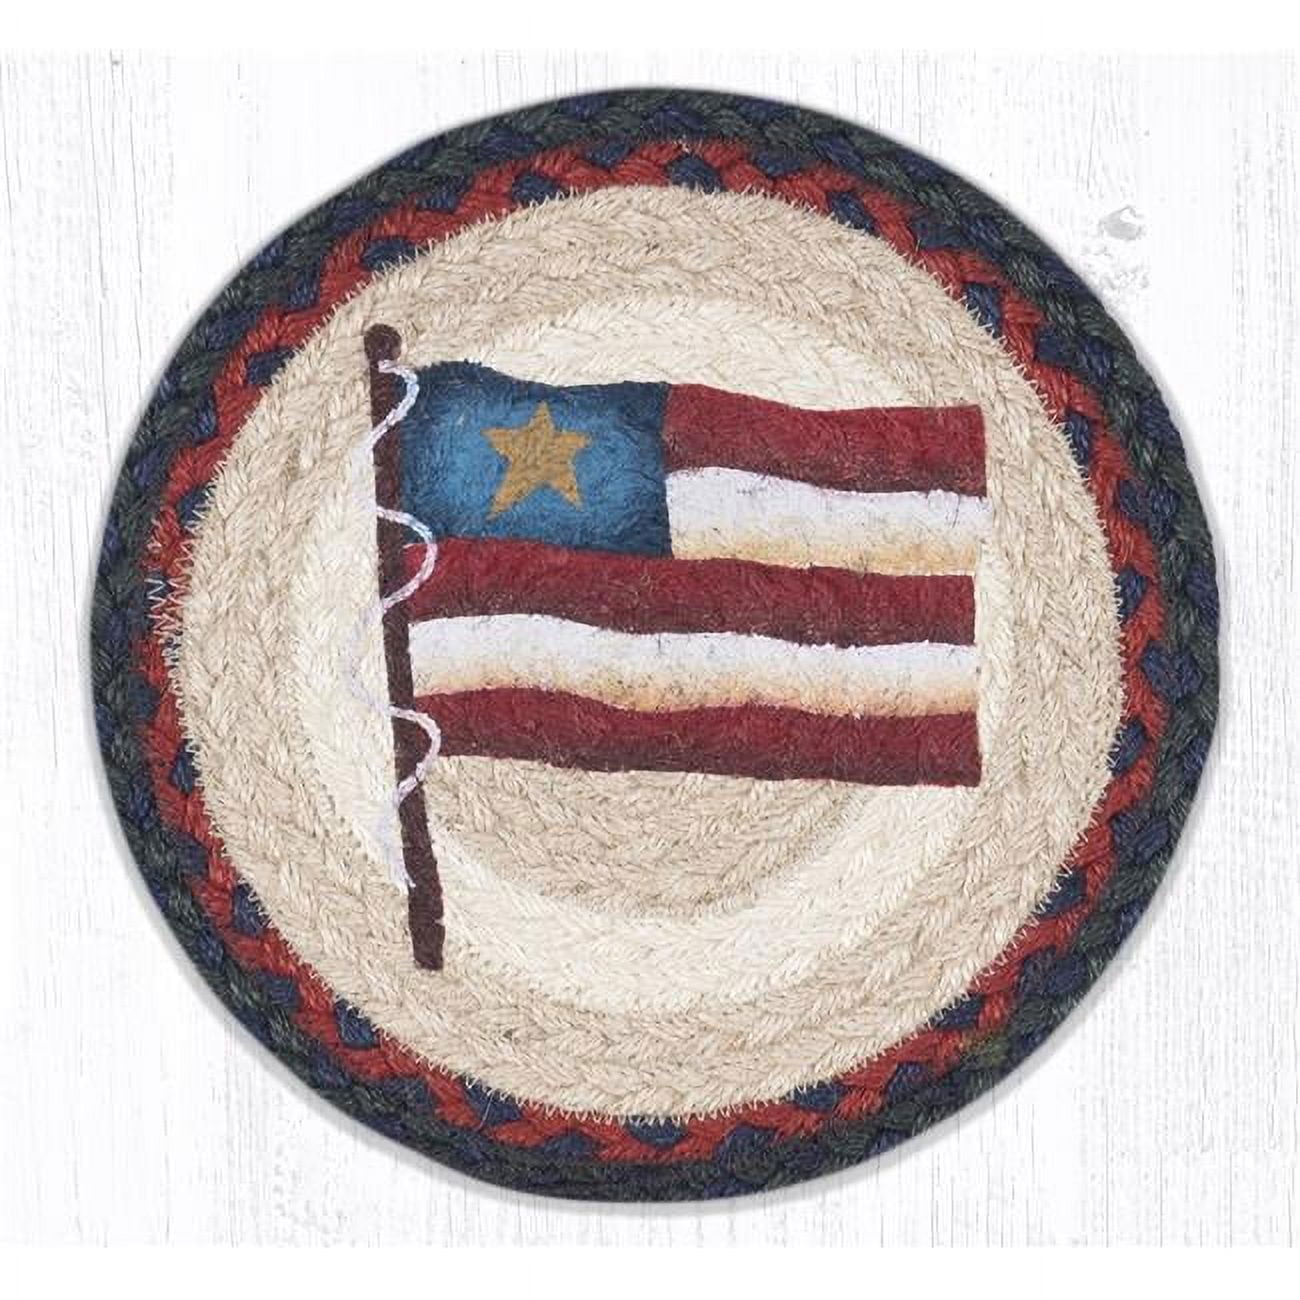 Capitol Importing 80-015psf 10 X 10 In. Mspr-15 Primitive Star Flag Printed Round Trivet